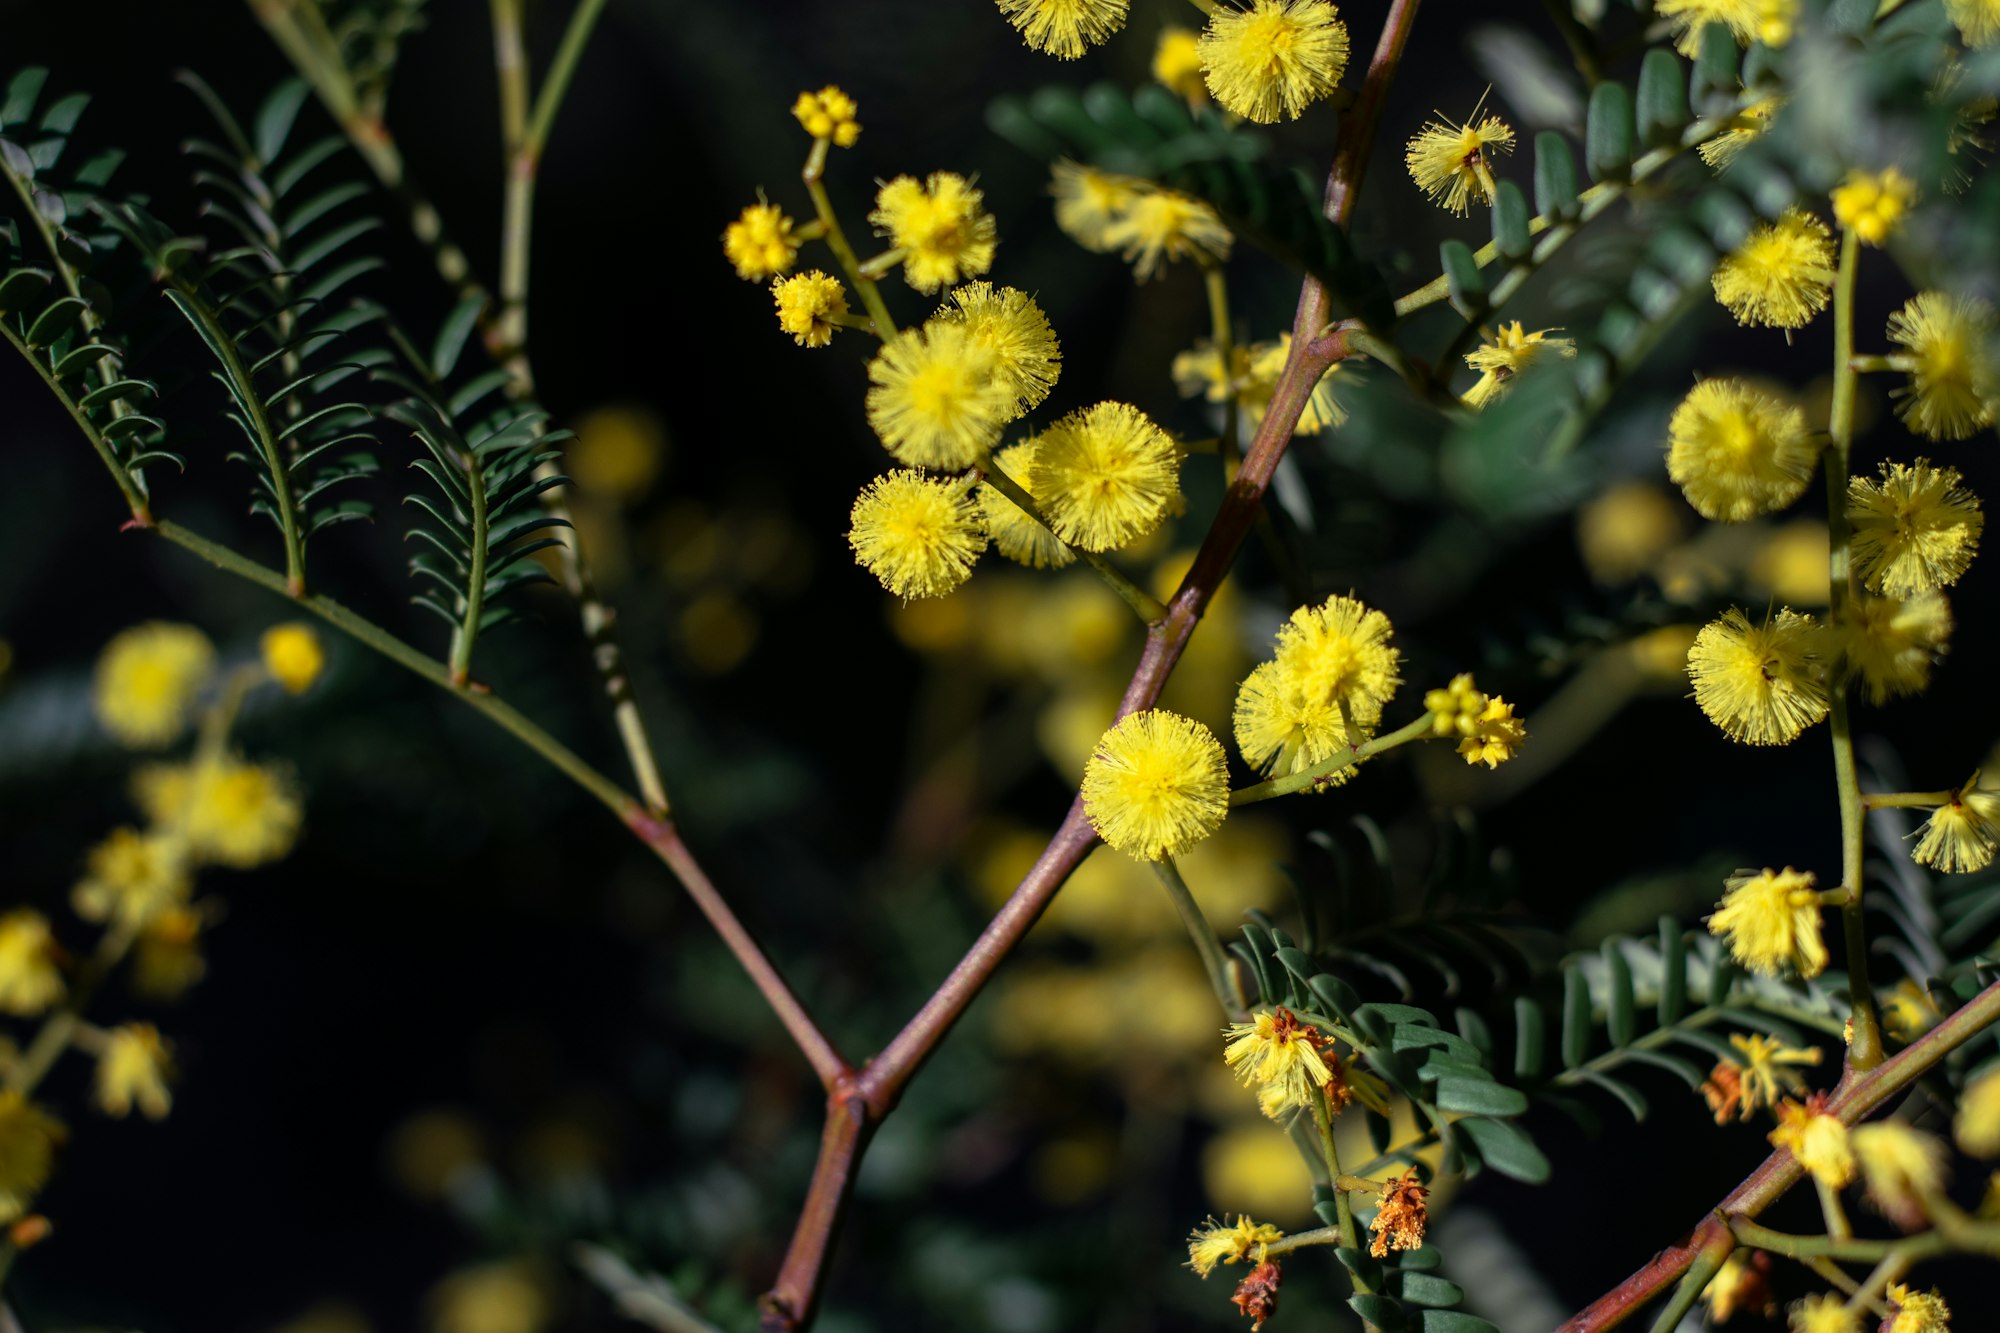 Golden Wattle found in the bush at Megalong Valley, Blue Mountains, NSW Australia